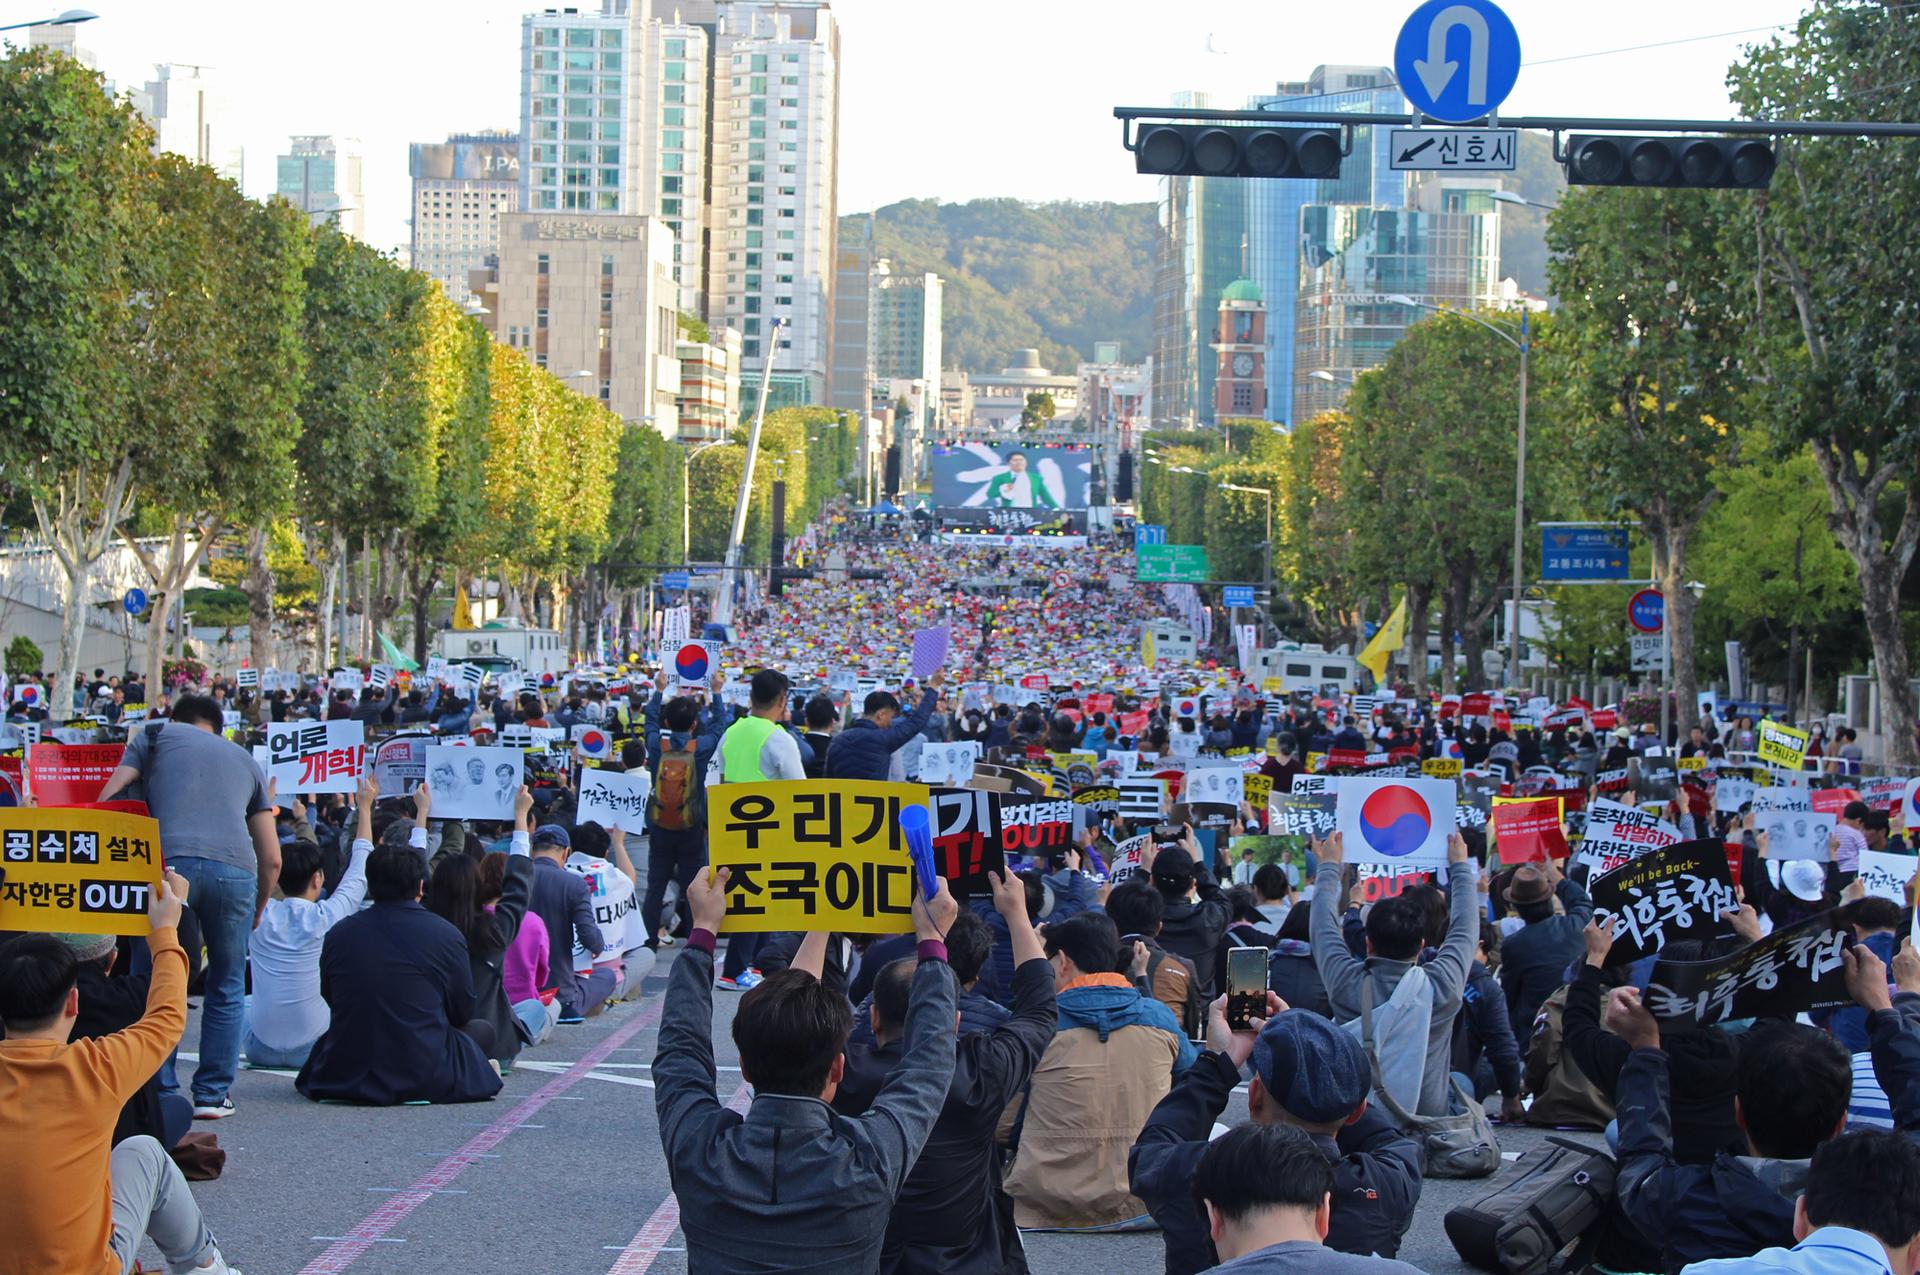 A mass protest in South Korea